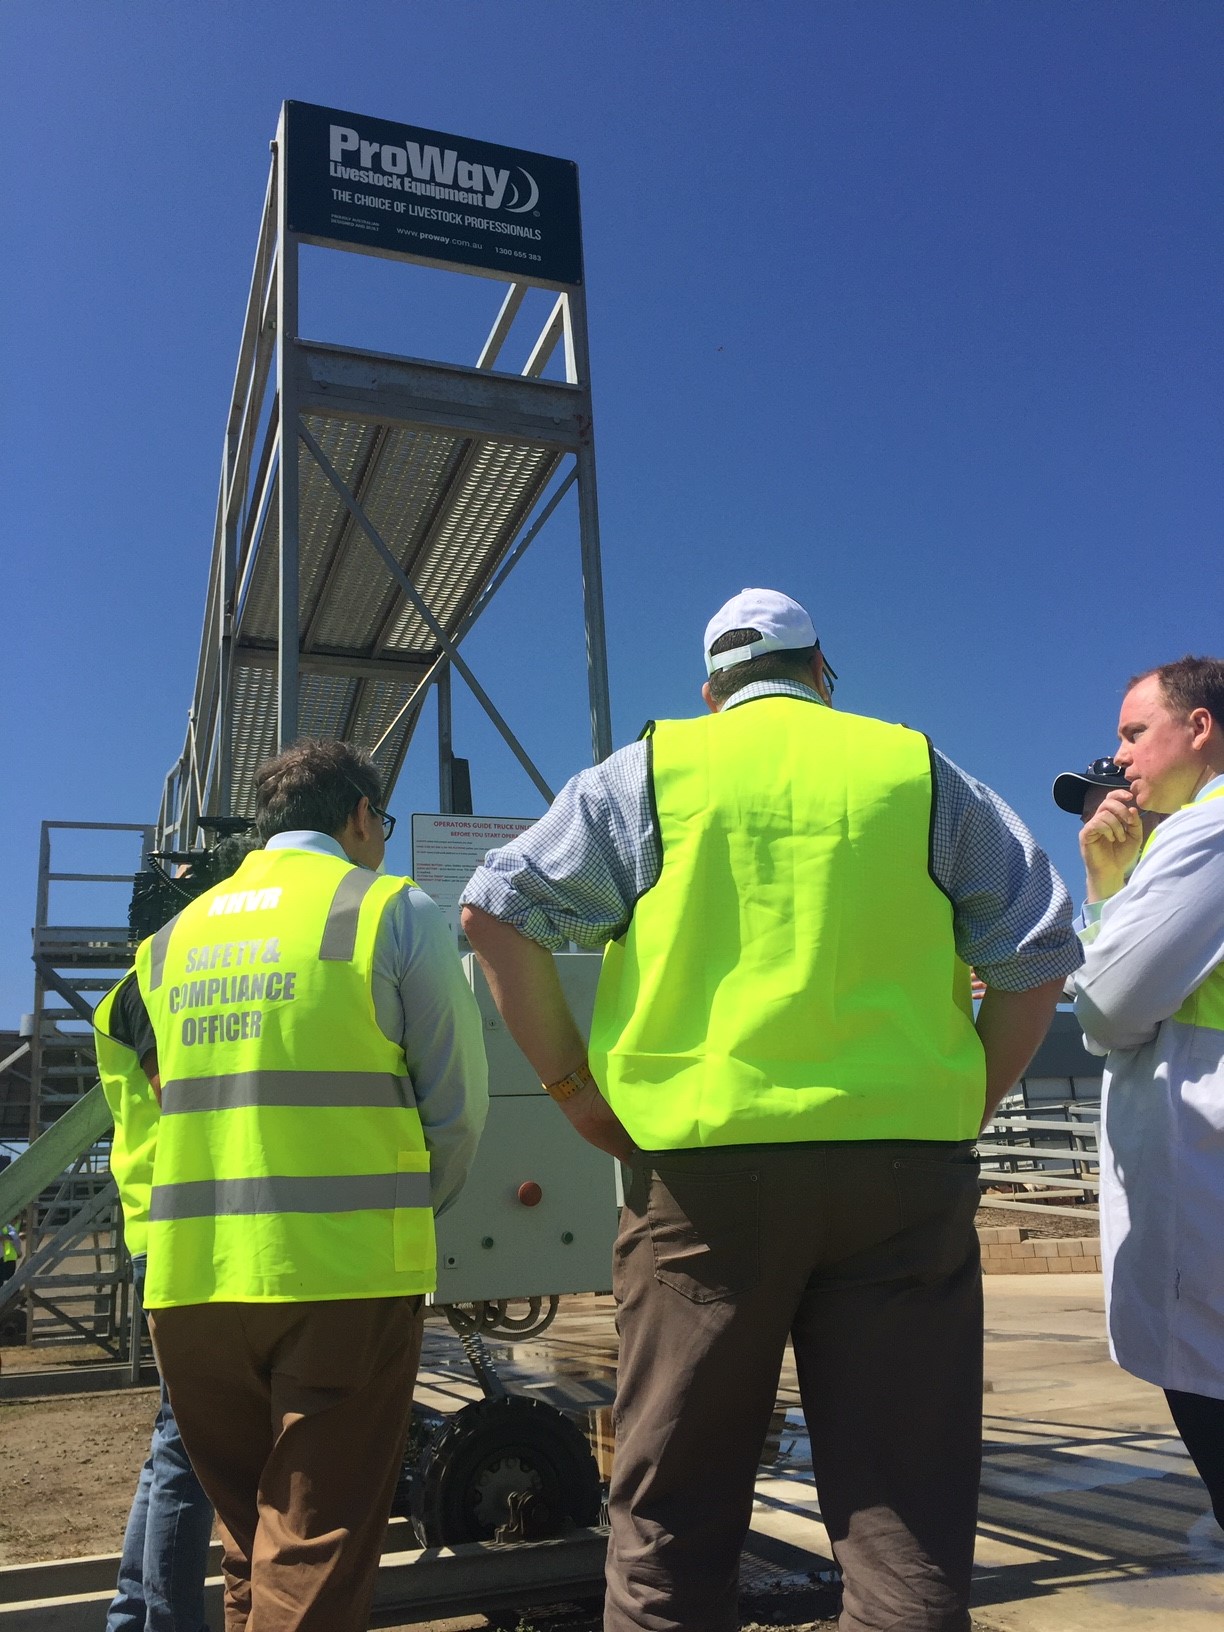 Livestock safety boost as unloading frame trial underway